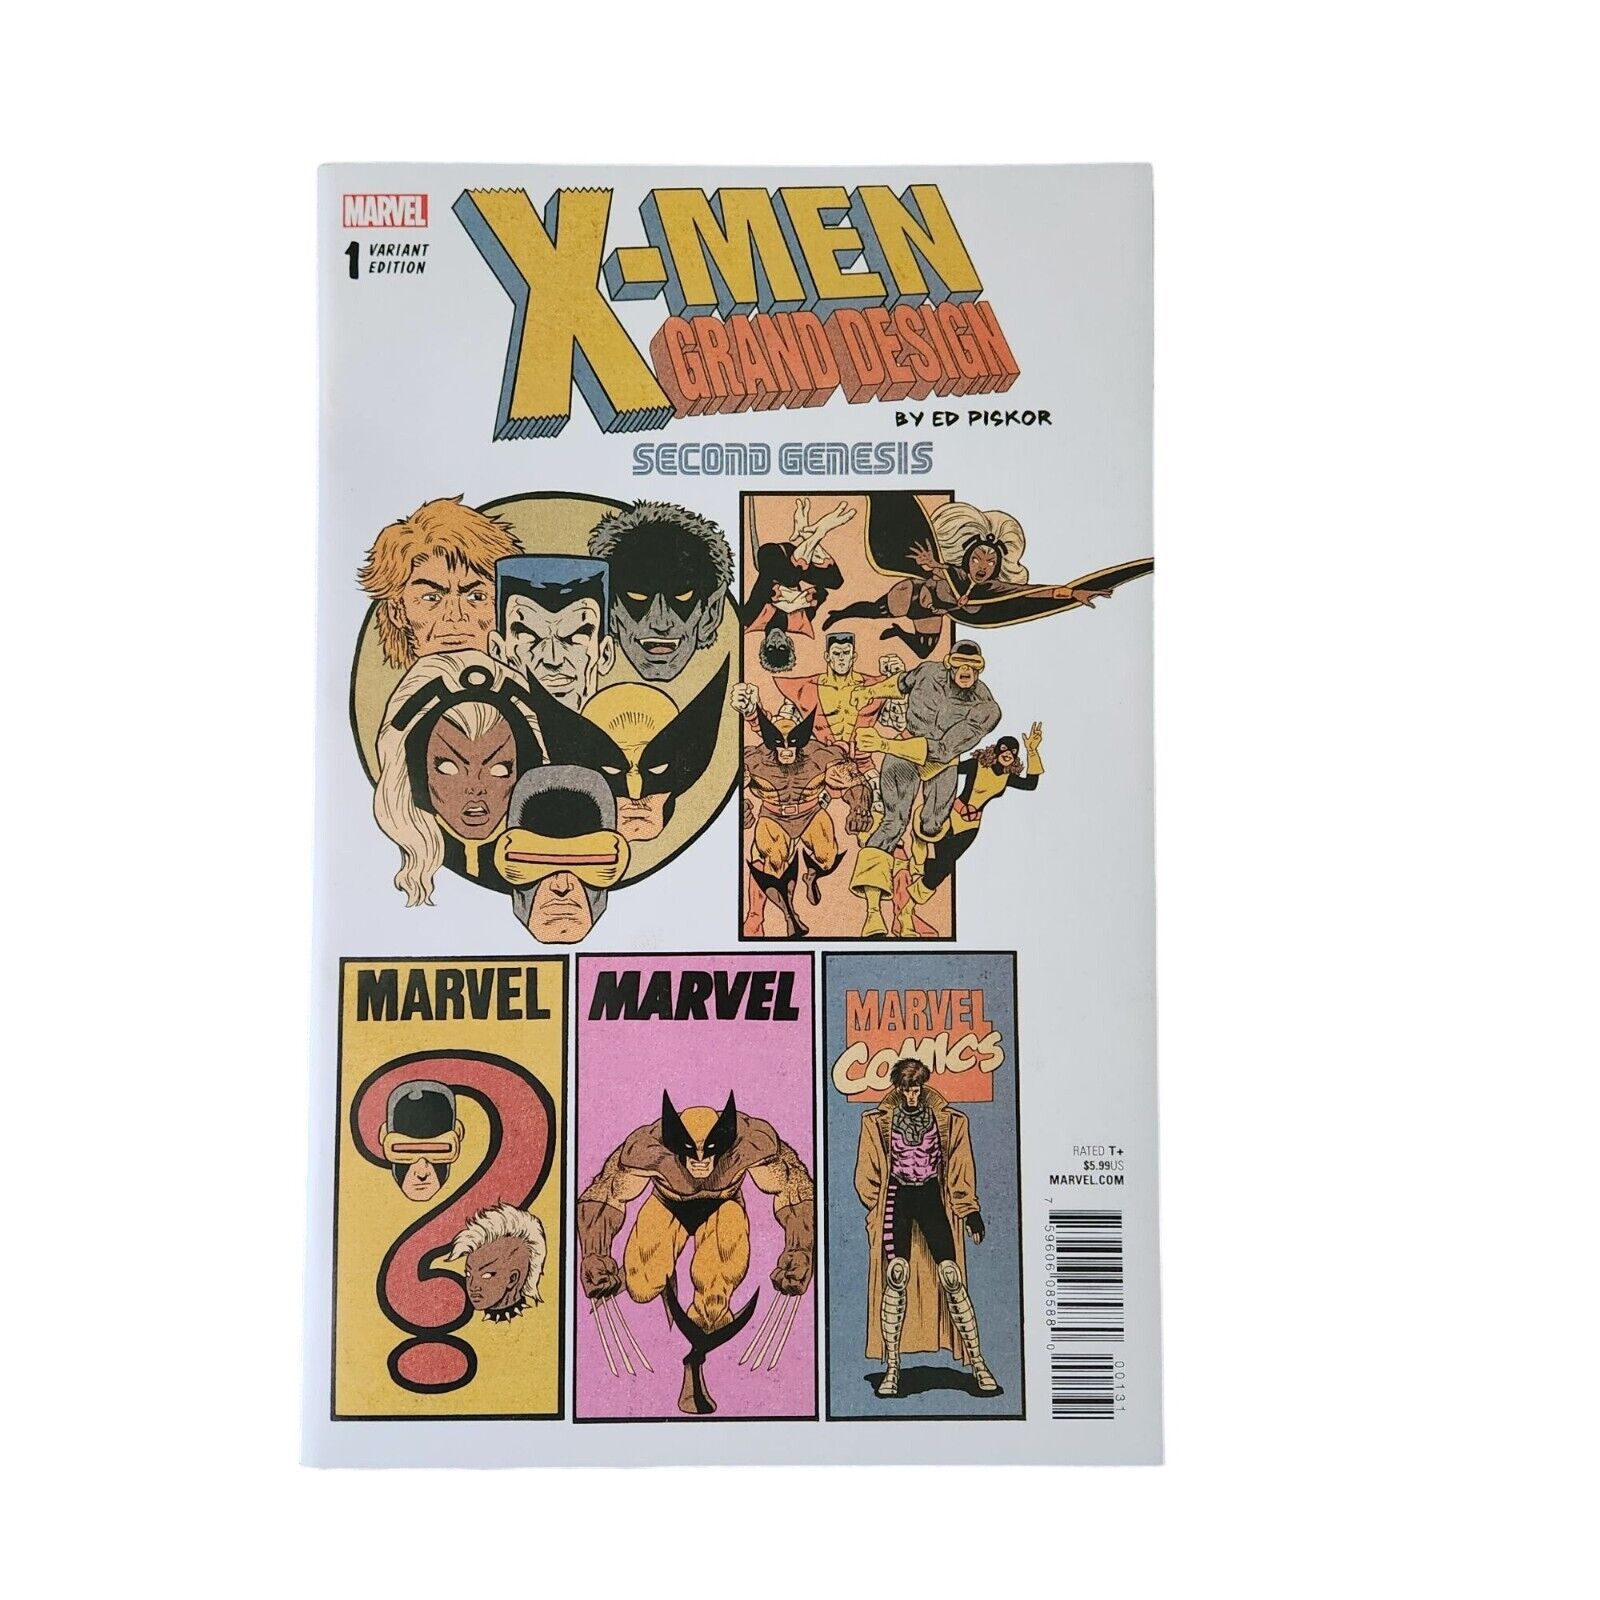 Marvel X-Men Grand Design Second Genesis #1 Comic Book Collector Bagged Boarded